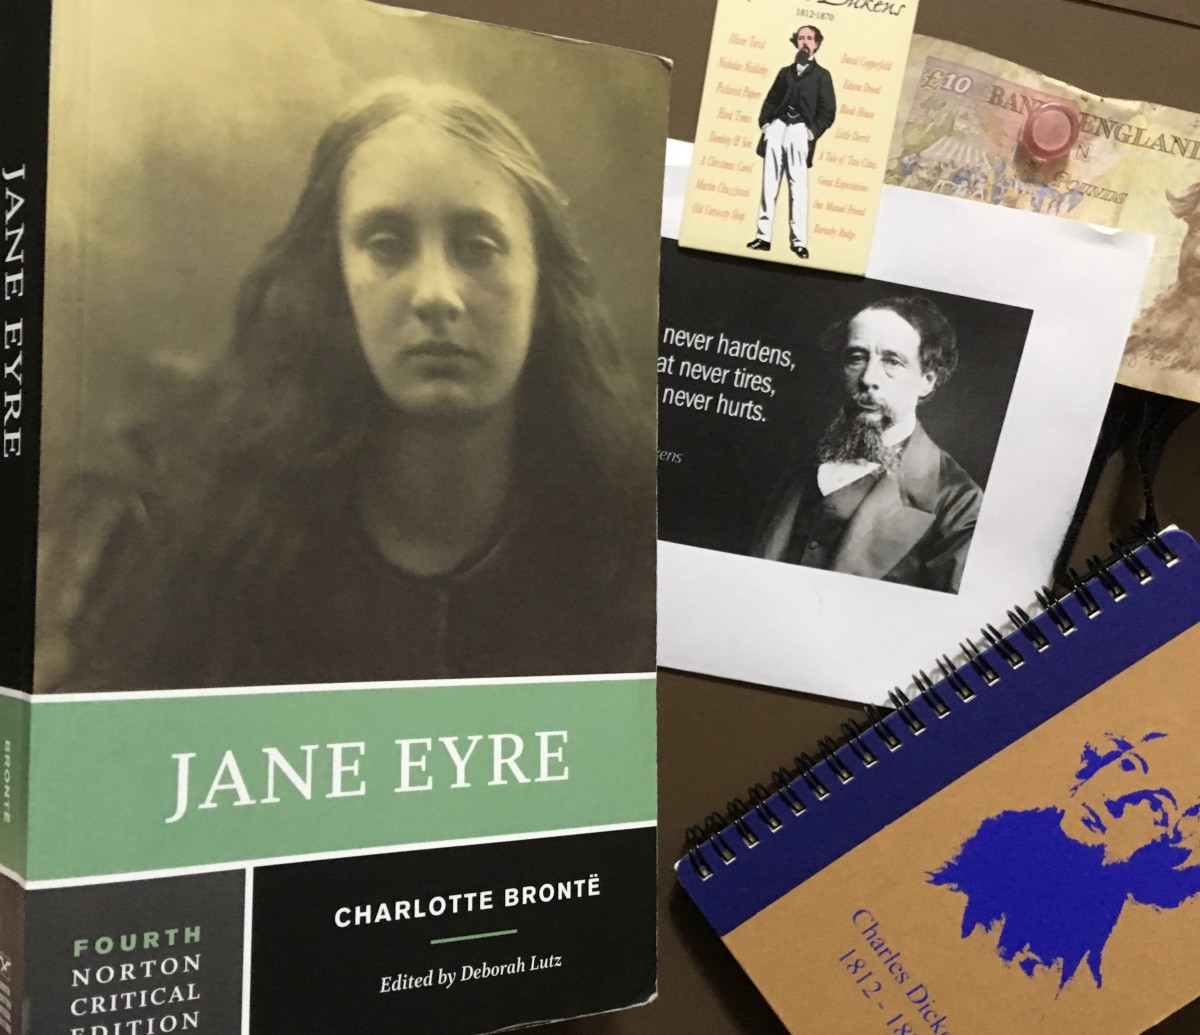 Jane Eyre (1847) – the greatest Victorian novel that Dickens didn’t write!